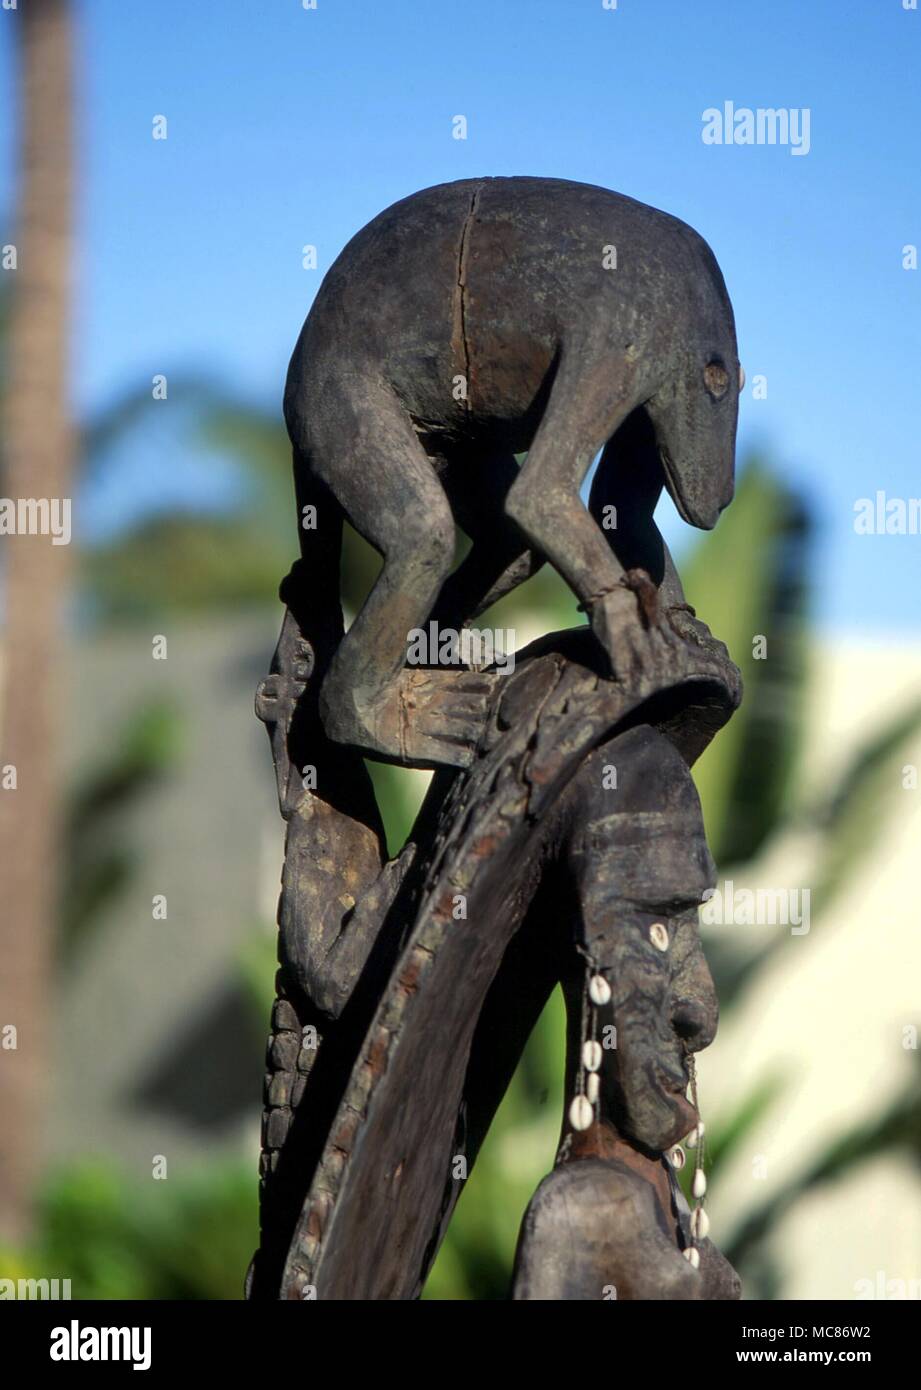 POLYNESIAN MYTHOLOGY Polynesian wooden magical statue of a curious monkey-like mythological creature. private collection, Hawaii Stock Photo